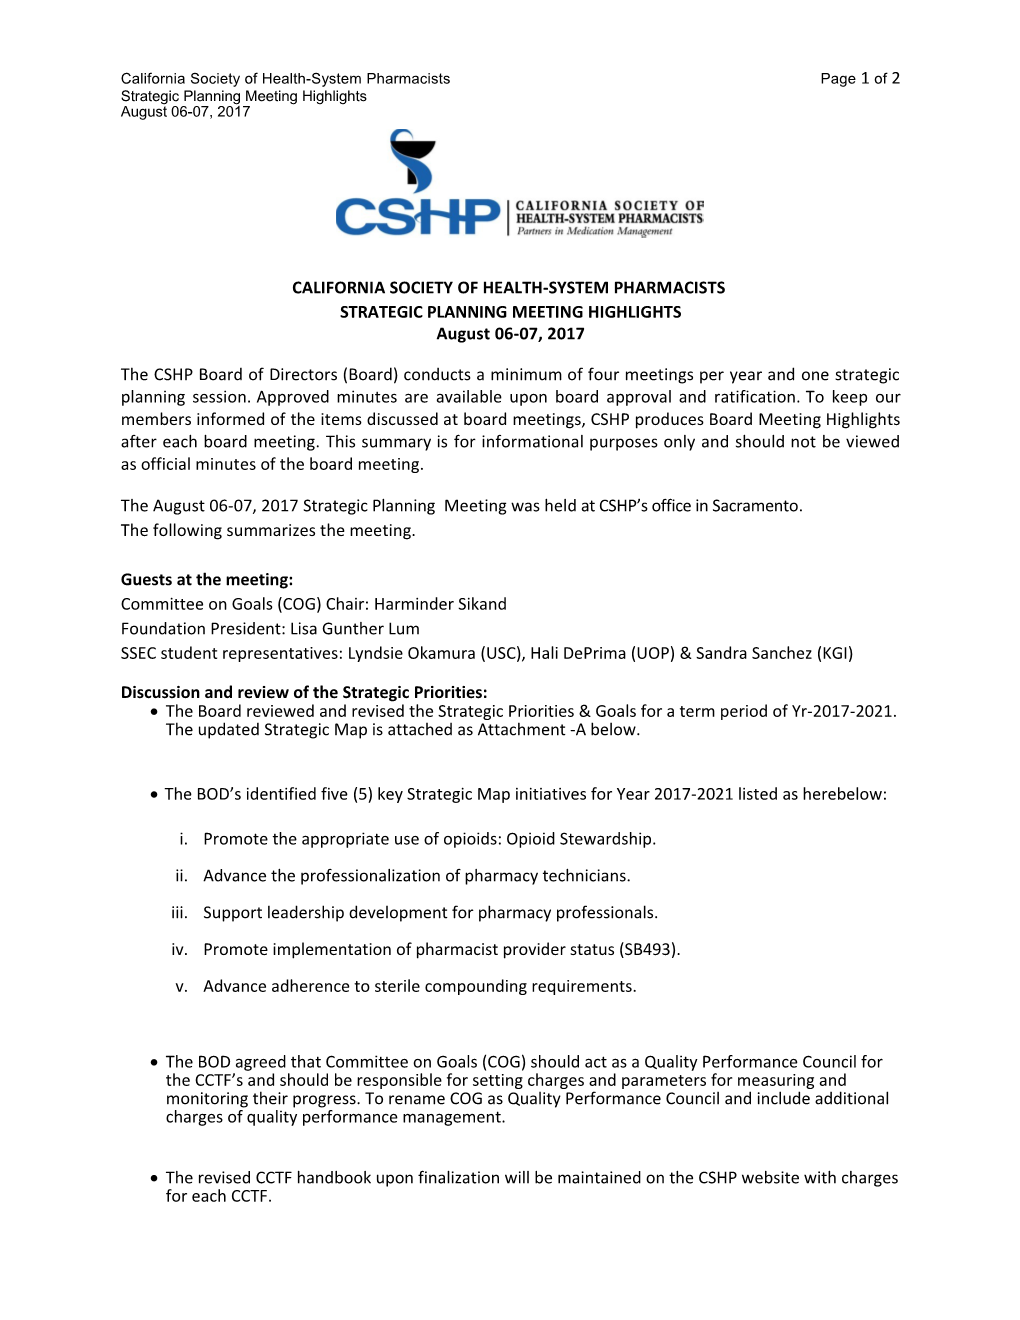 California Society of Health-System Pharmacists Page 1 of 2